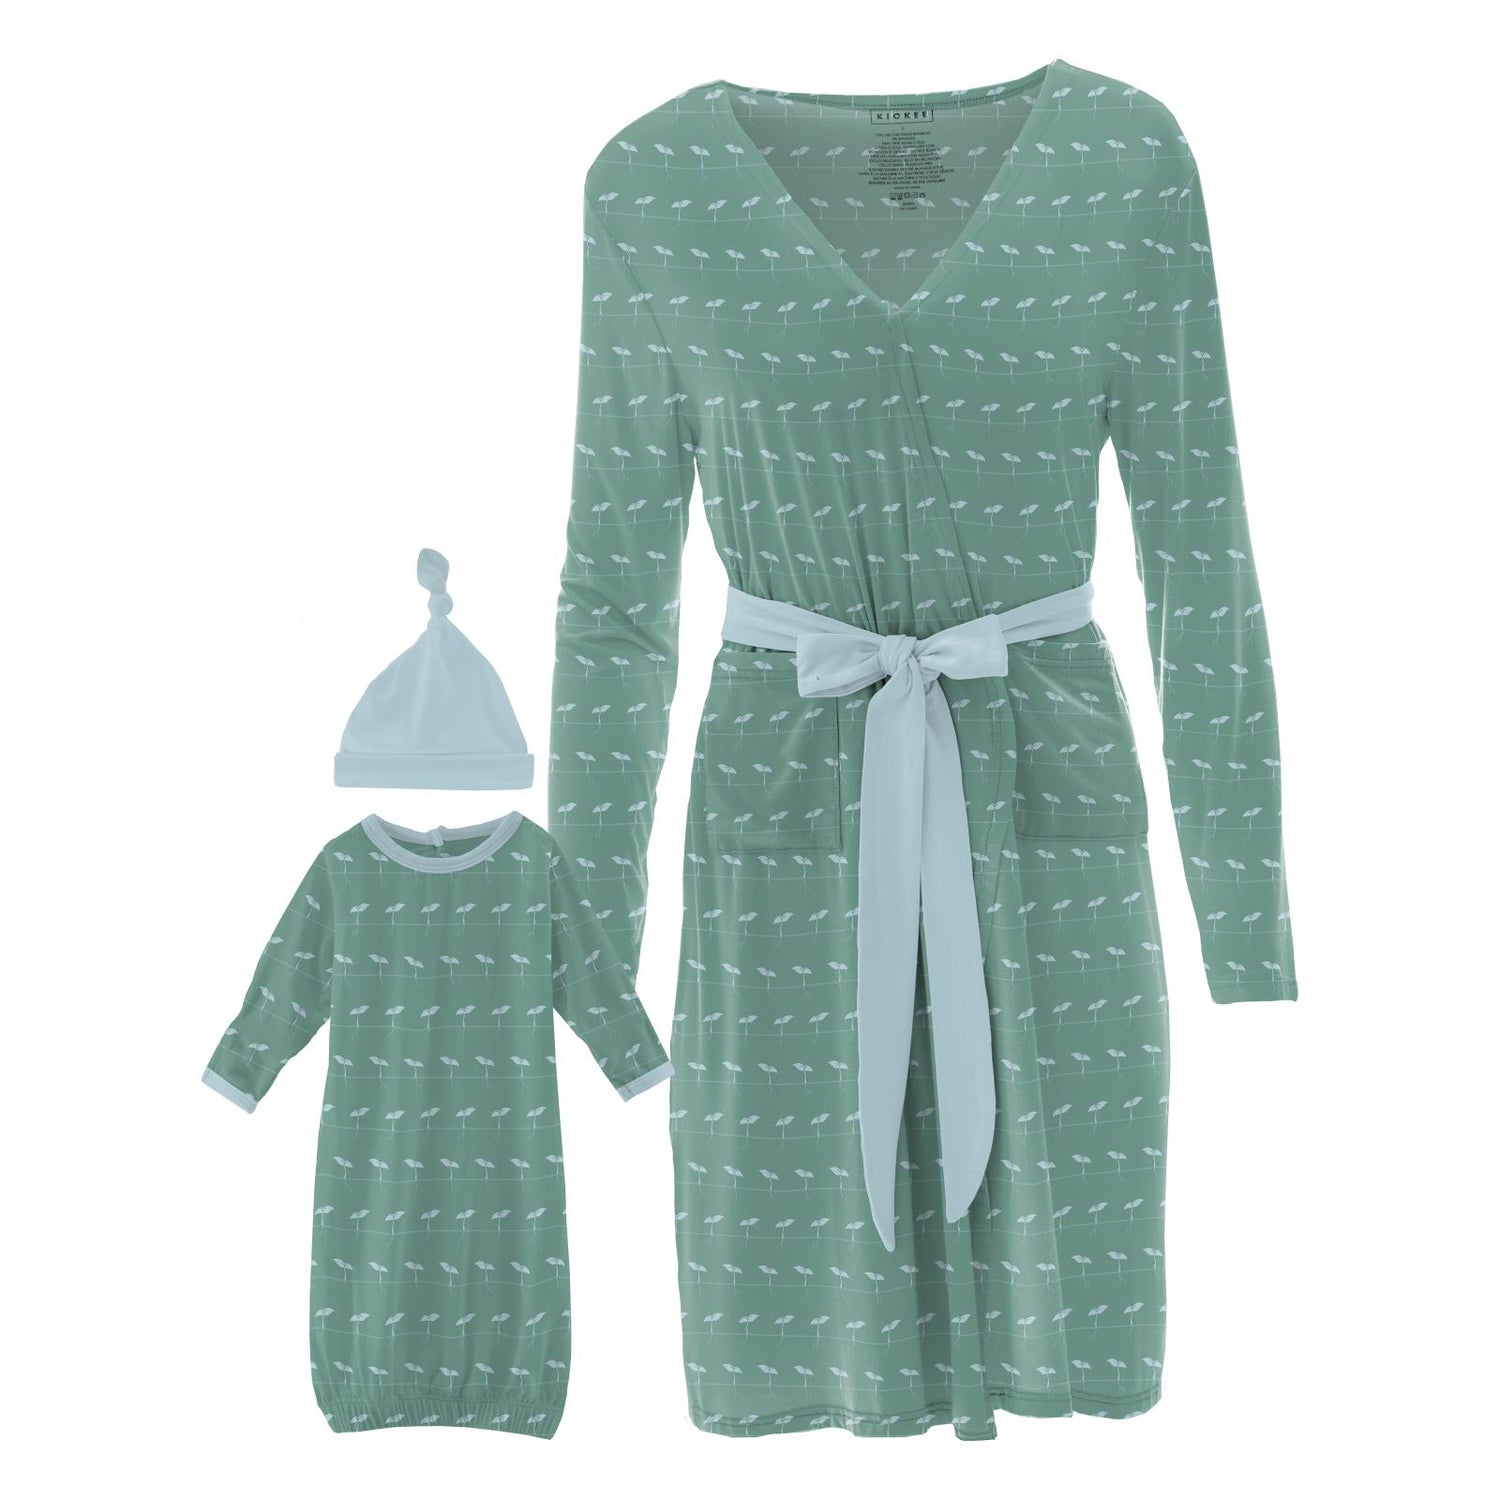 Women's Maternity/Nursing Robe & Layette Gown Set in Shore Sprouts